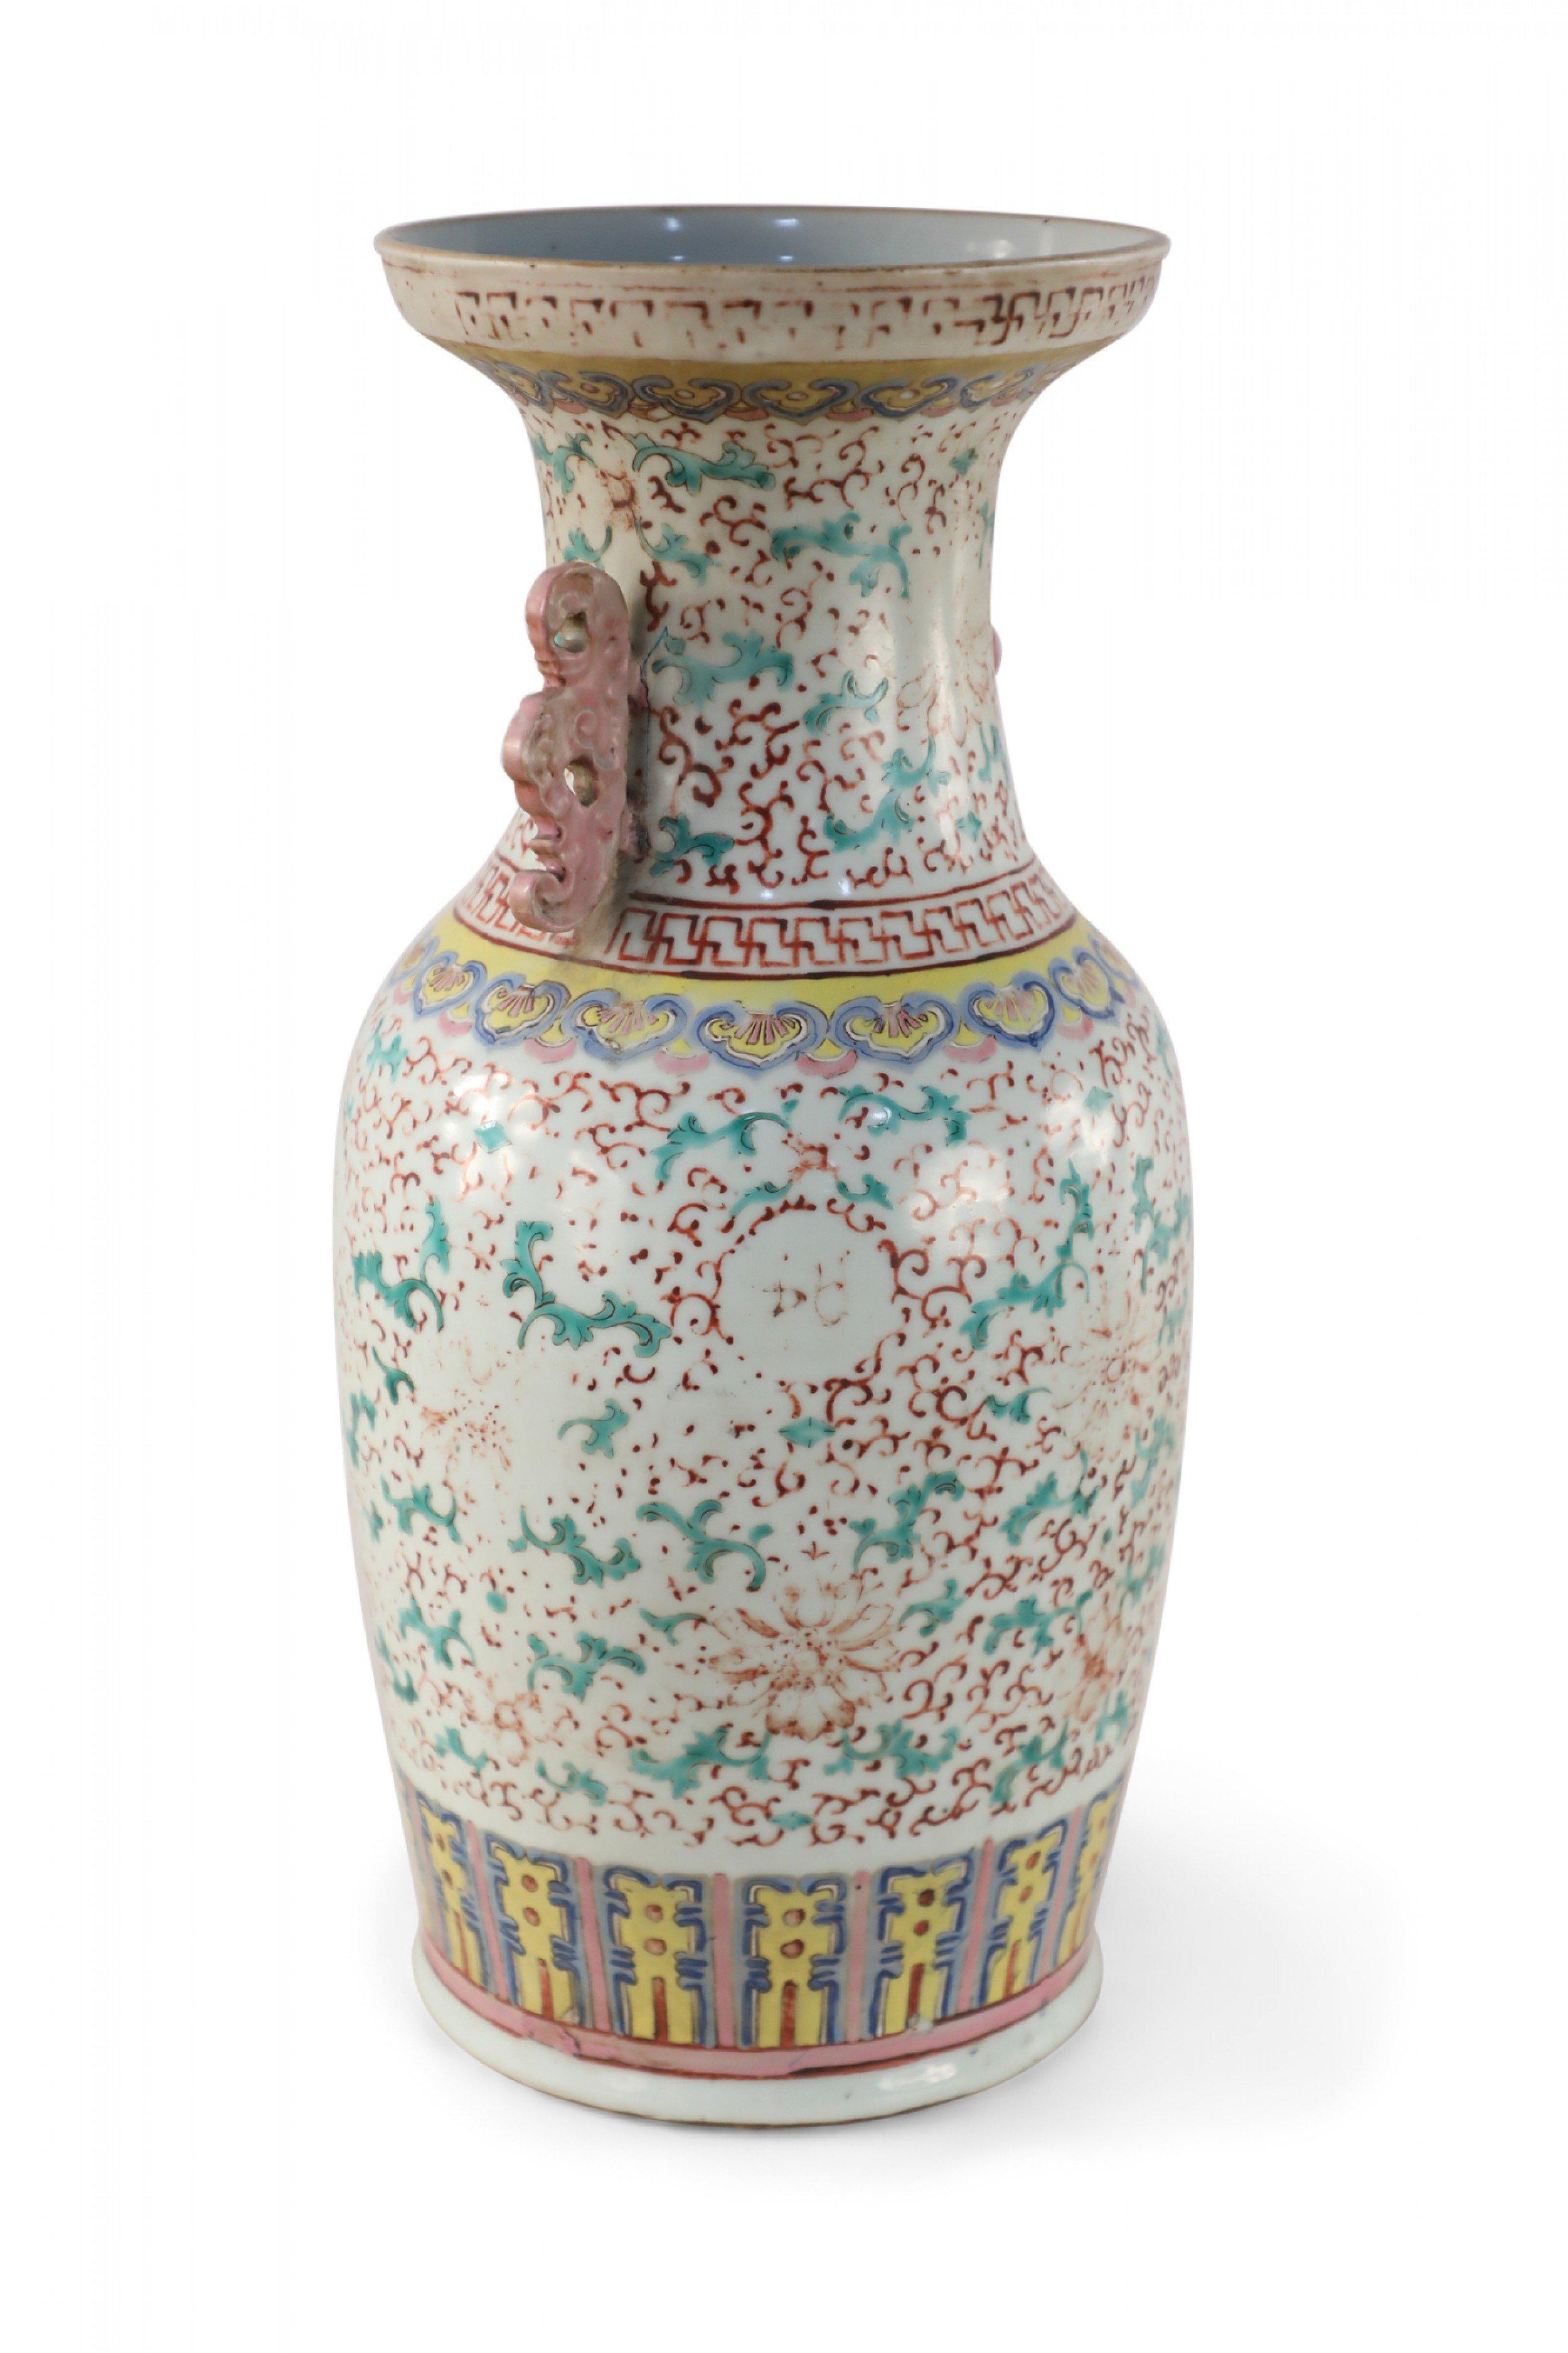 Antique Chinese (Late 19th Century) white porcelain urn decorated with a faded green and red floral pattern and accented with pale pink scrolled handles along the neck.
 